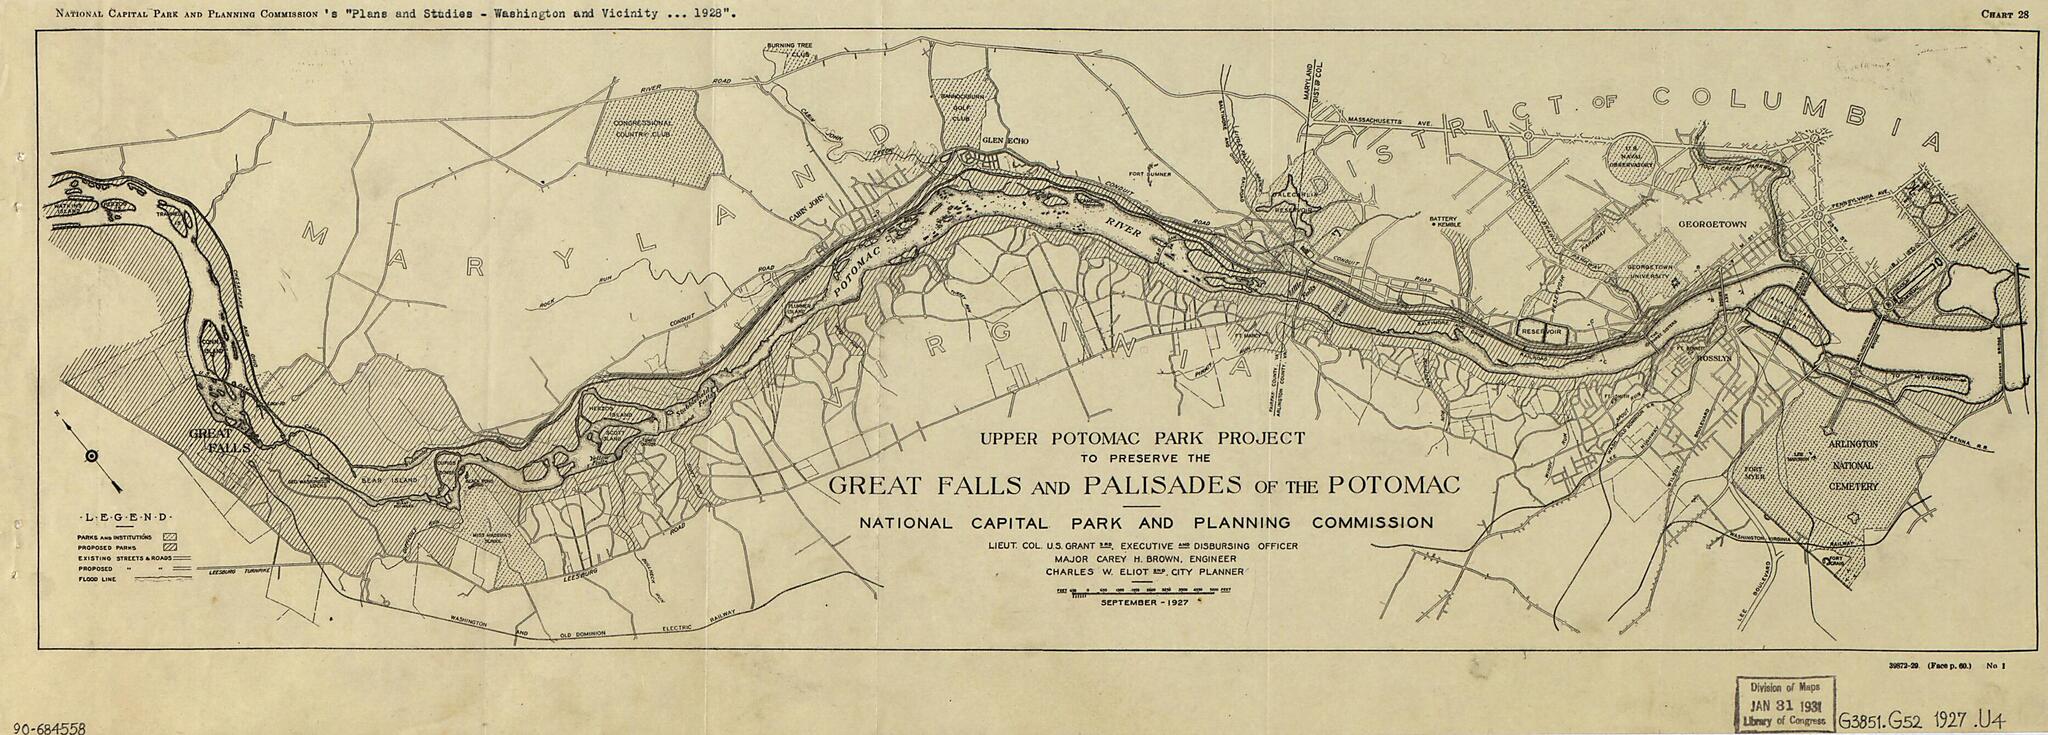 This old map of Upper Potomac Park Project to Preserve the Great Falls and Palisades of the Potomac from 1927 was created by Carey H. Brown, Charles W. (Charles William) Eliot, U. S. (Ulysses S.) Grant,  United States. National Capital Park and Planning 